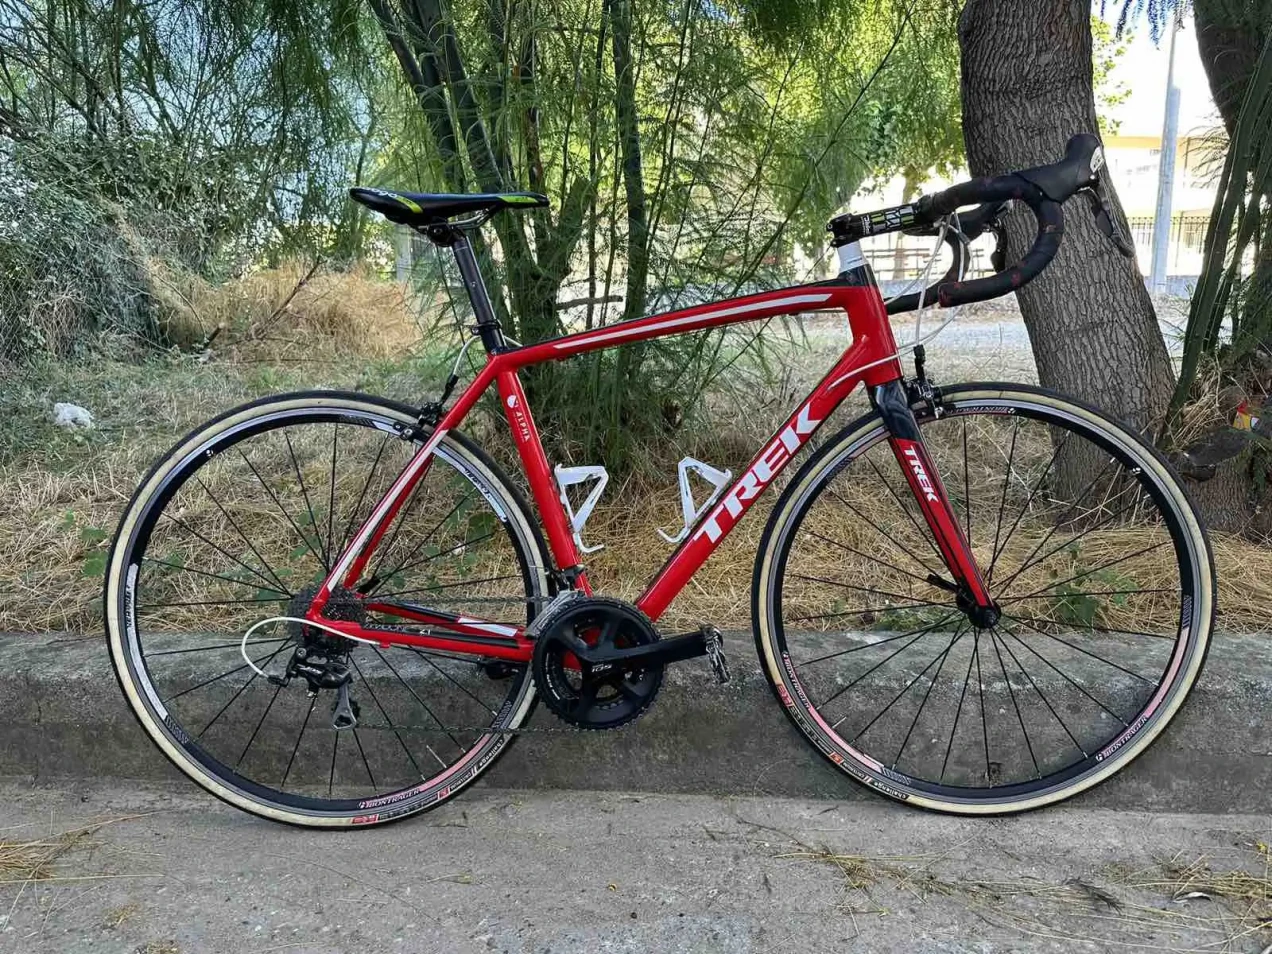 Trek Madone 2.1 H2 Compact used in L | buycycle